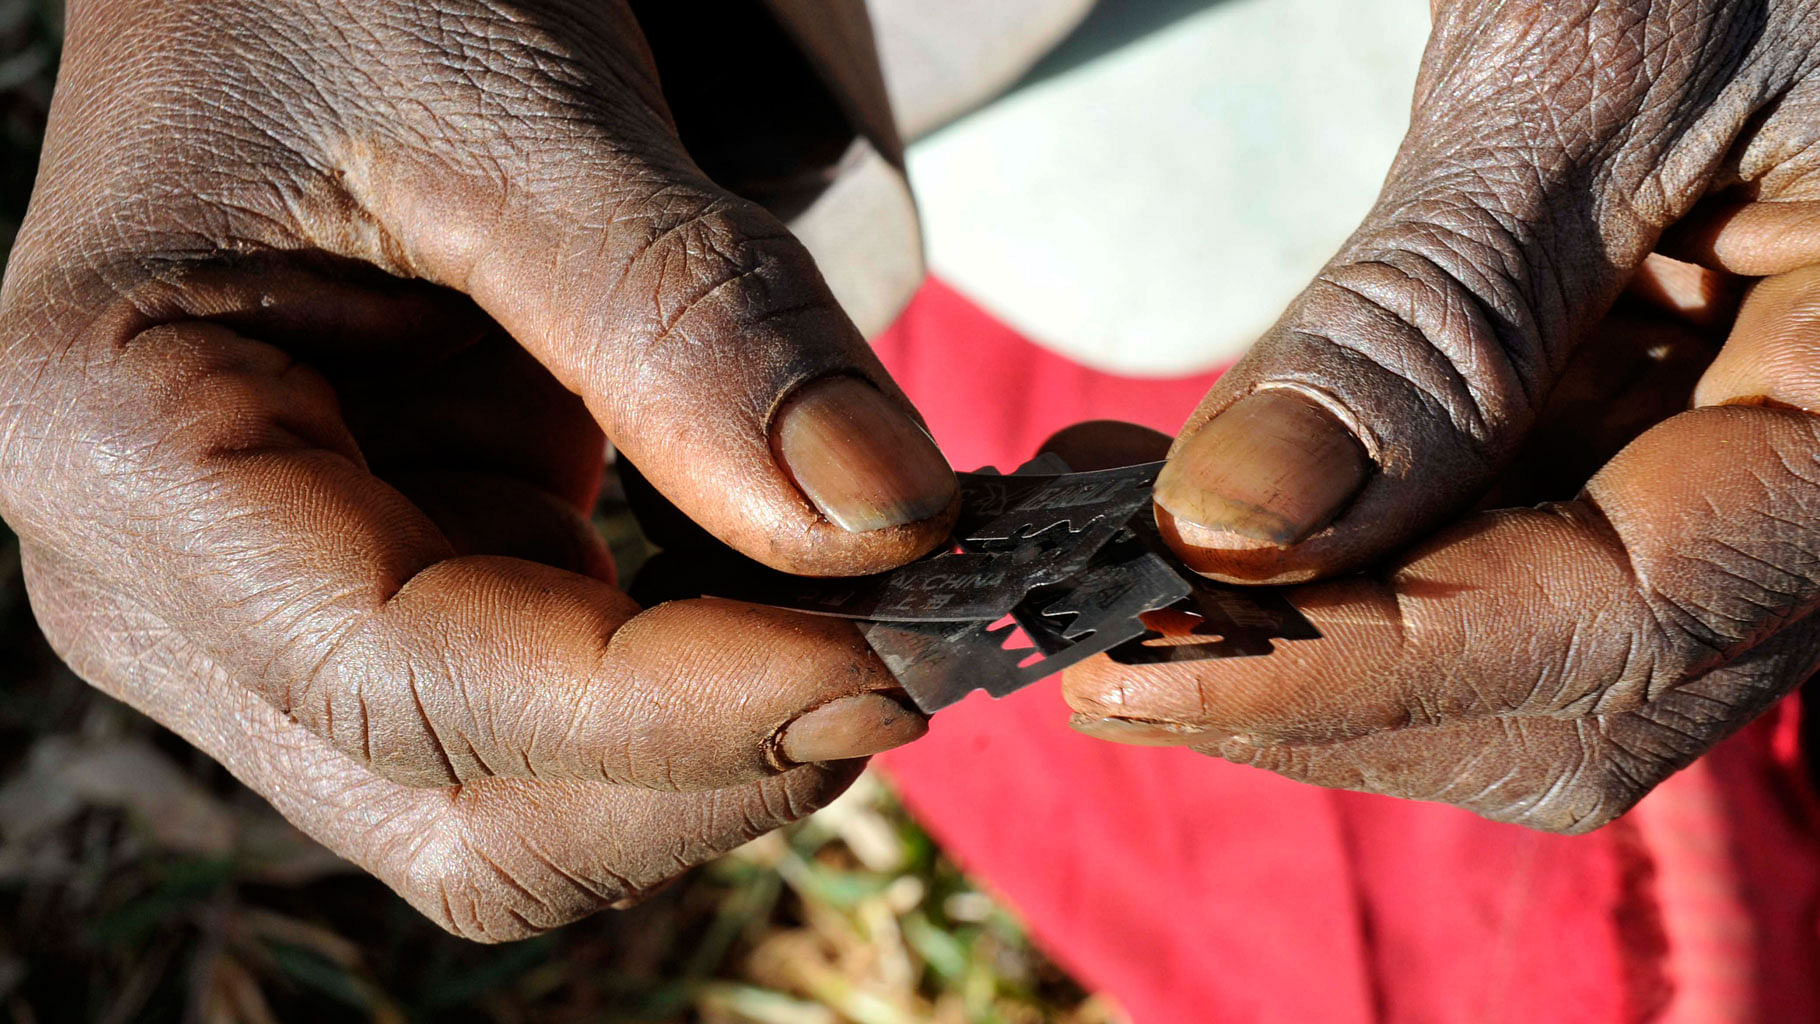 A traditional surgeon holds razor blades before carrying out female genital mutilation on teenage girls from the Sebei tribe in Uganda. (Photo: Reuters)